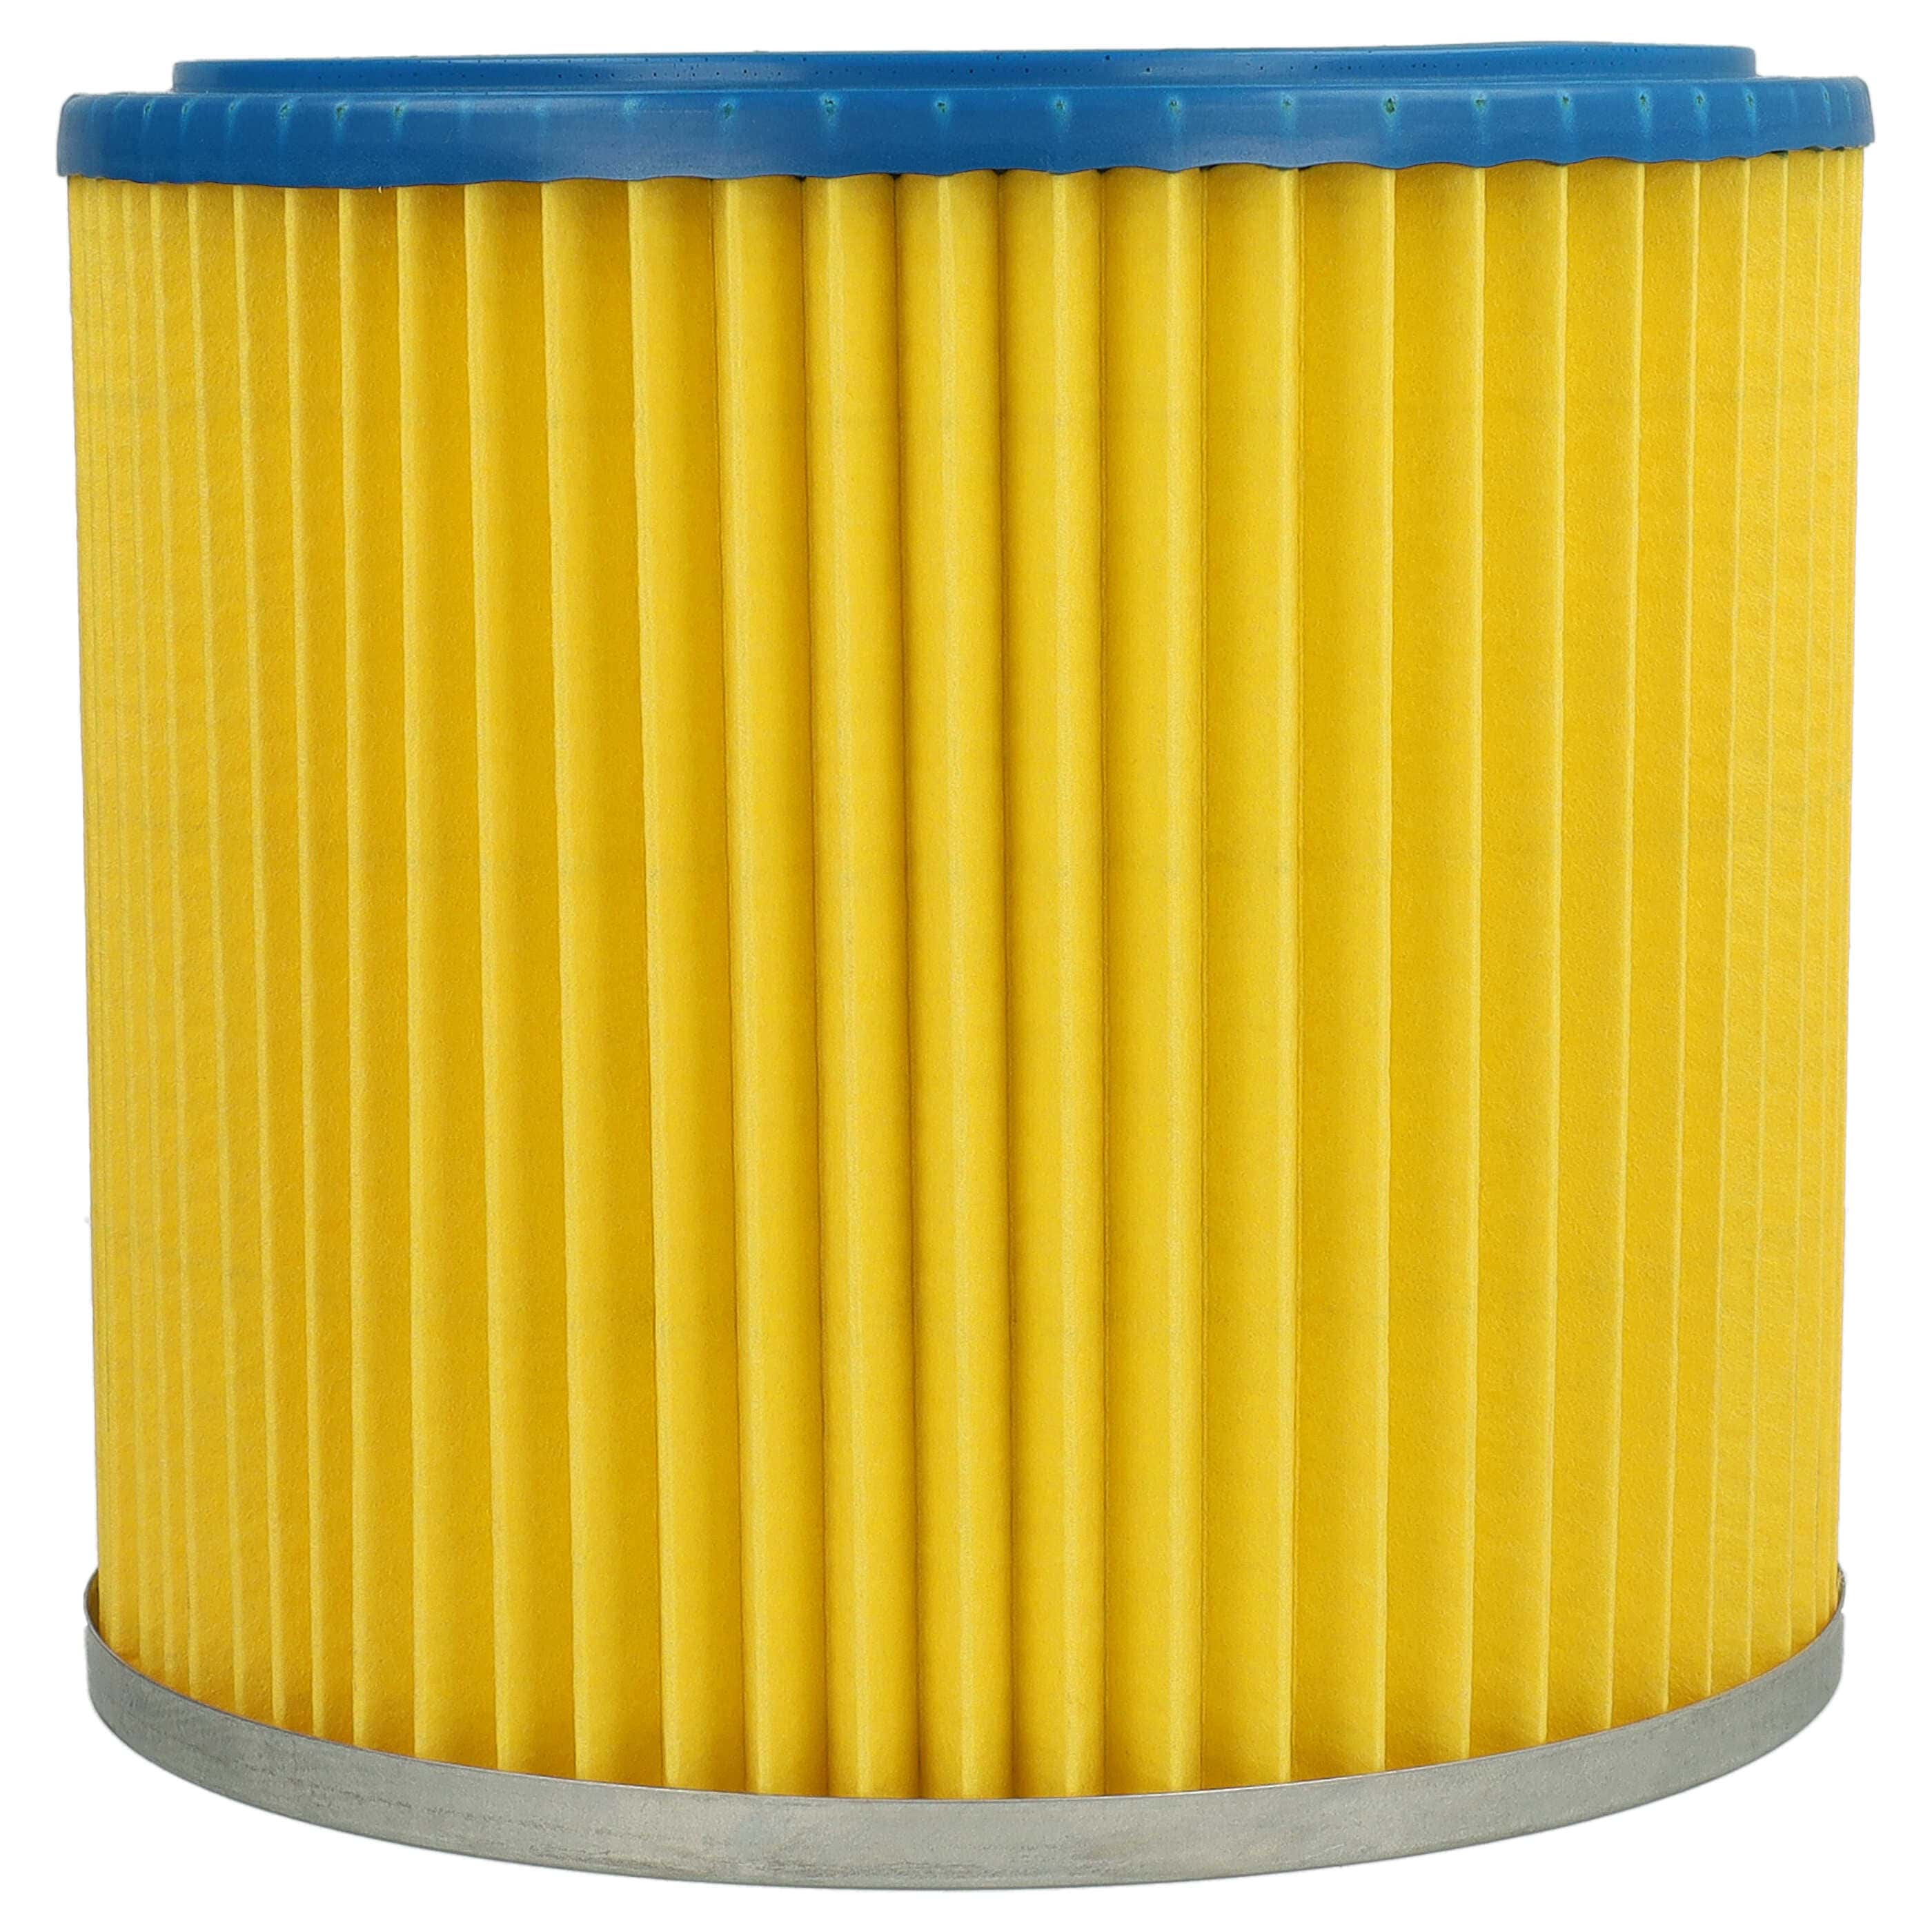 1x cartridge filter replaces Einhell 2351110 for LIV Vacuum Cleaner, blue / yellow